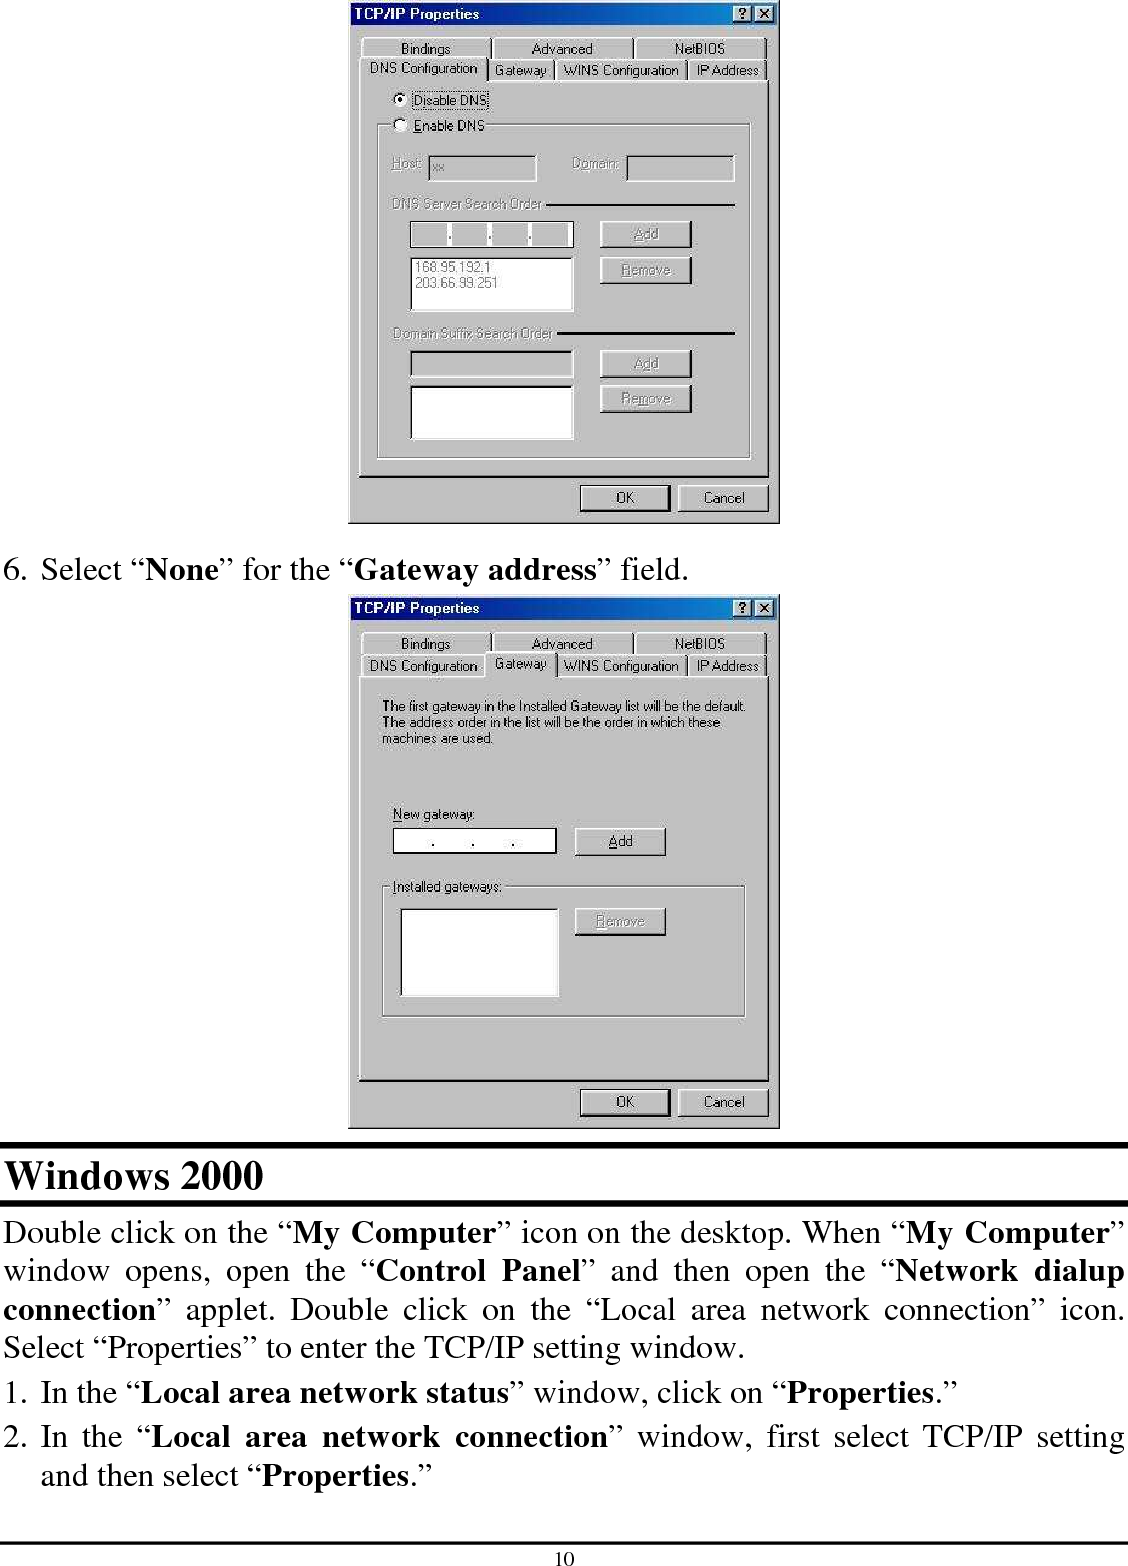 10  6. Select “None” for the “Gateway address” field.  Windows 2000 Double click on the “My Computer” icon on the desktop. When “My Computer” window  opens,  open  the  “Control  Panel”  and  then  open  the  “Network  dialup connection”  applet.  Double  click  on  the  “Local  area  network  connection”  icon. Select “Properties” to enter the TCP/IP setting window. 1. In the “Local area network status” window, click on “Properties.” 2. In  the  “Local  area  network  connection”  window,  first  select  TCP/IP  setting and then select “Properties.” 